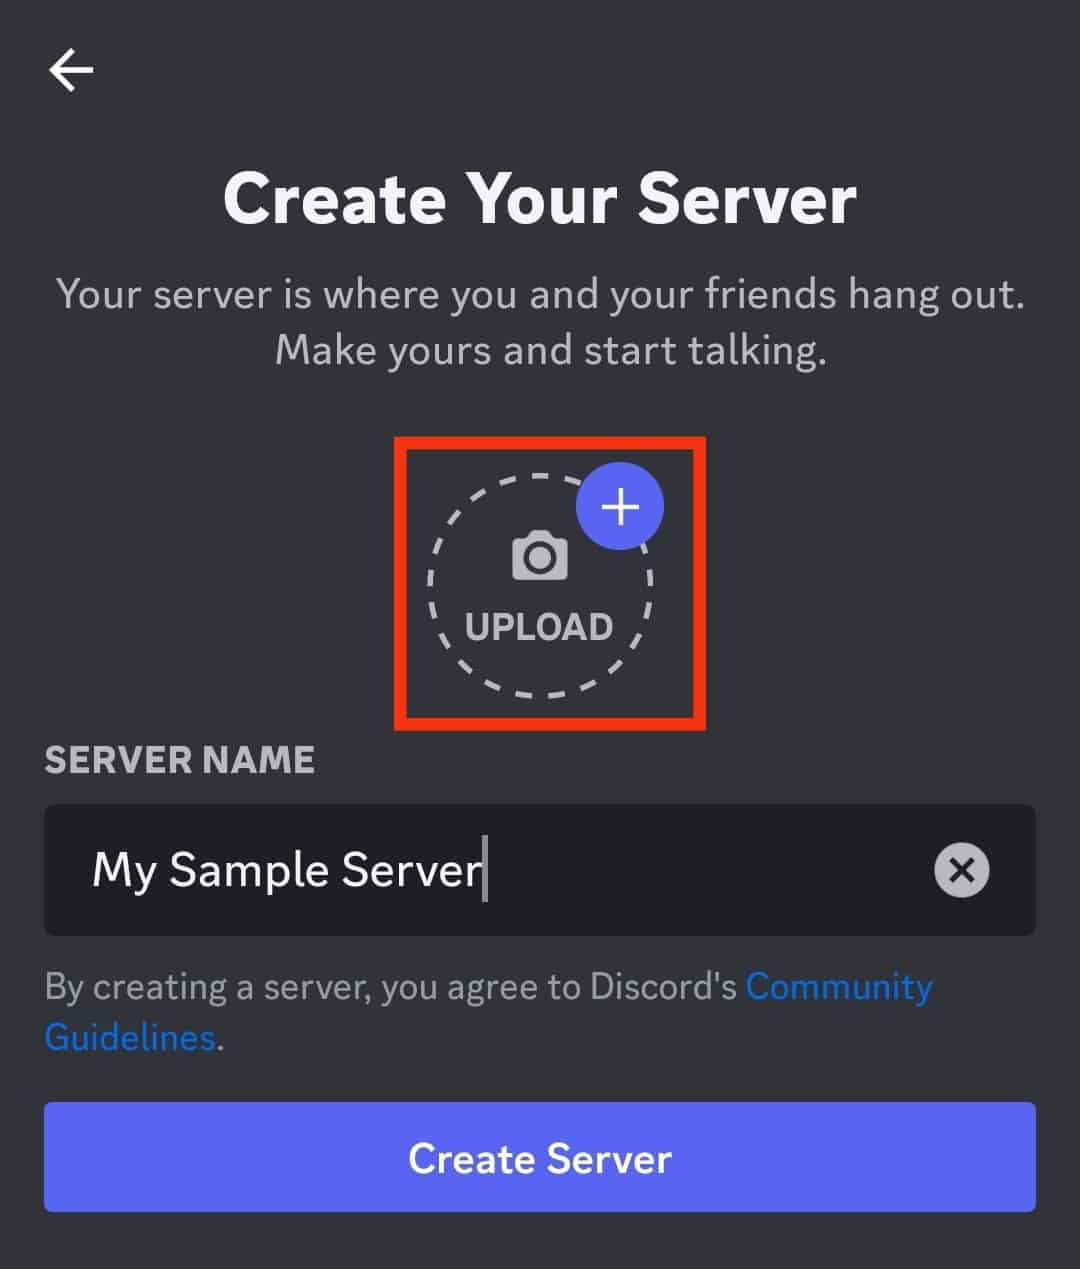 Upload The Server Picture